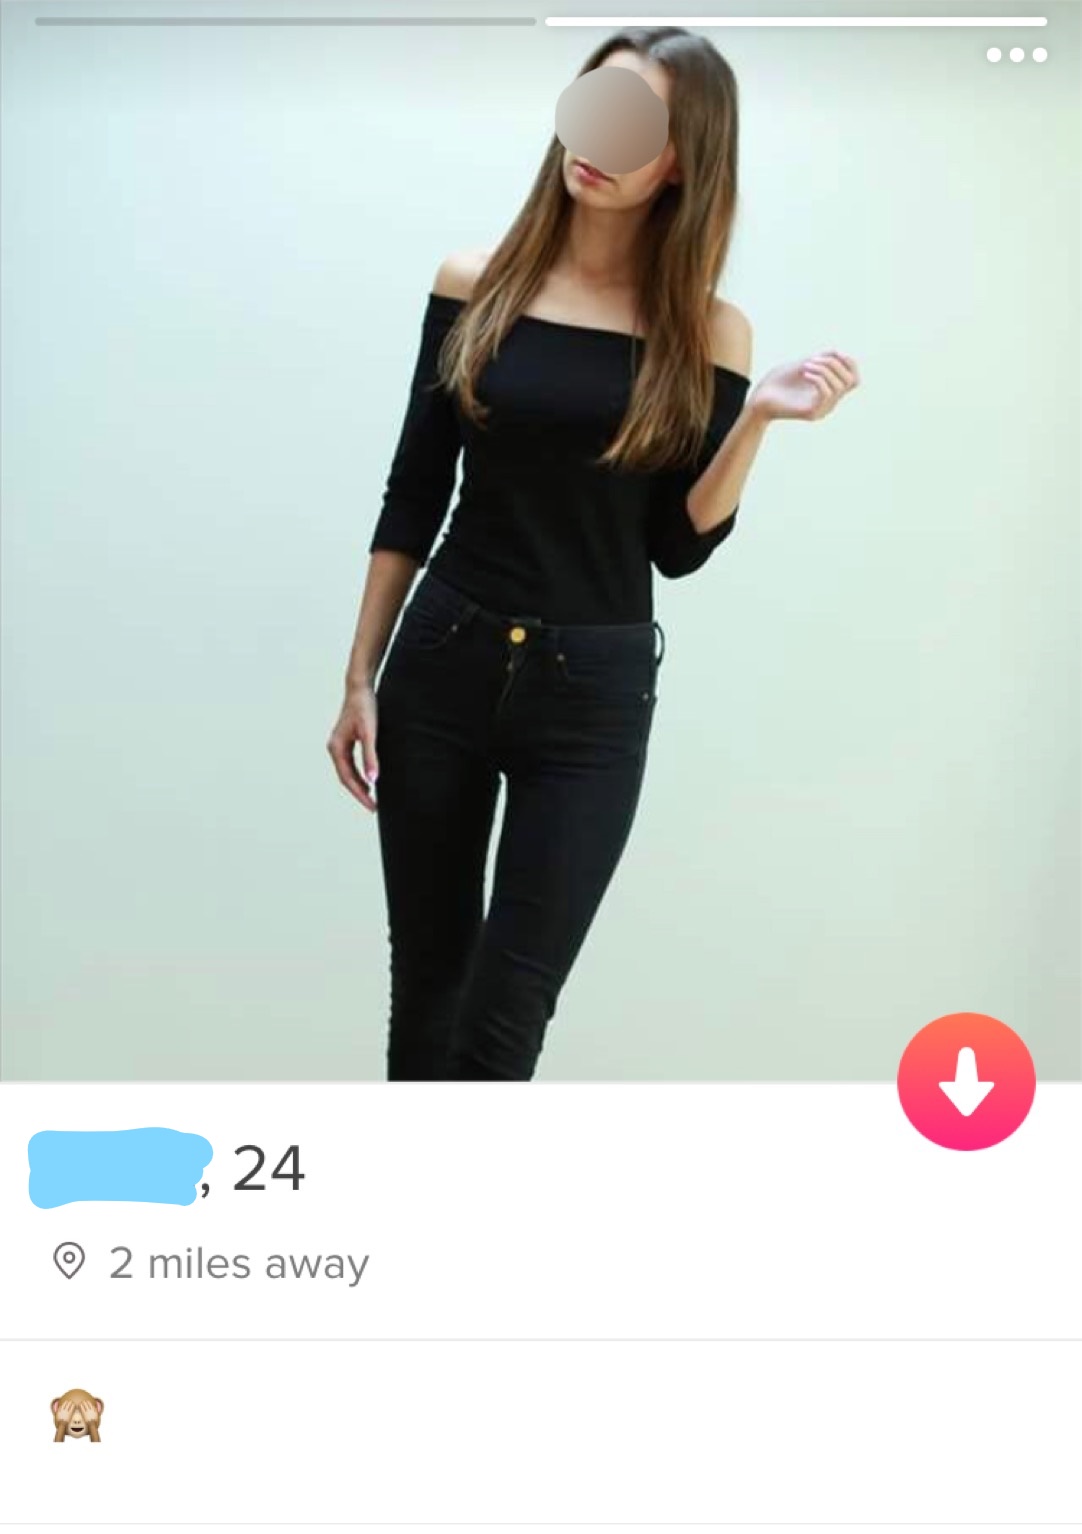 Hot Polish Virgin Lr How To Meet Polish Girls On Tinder Playing With Fire